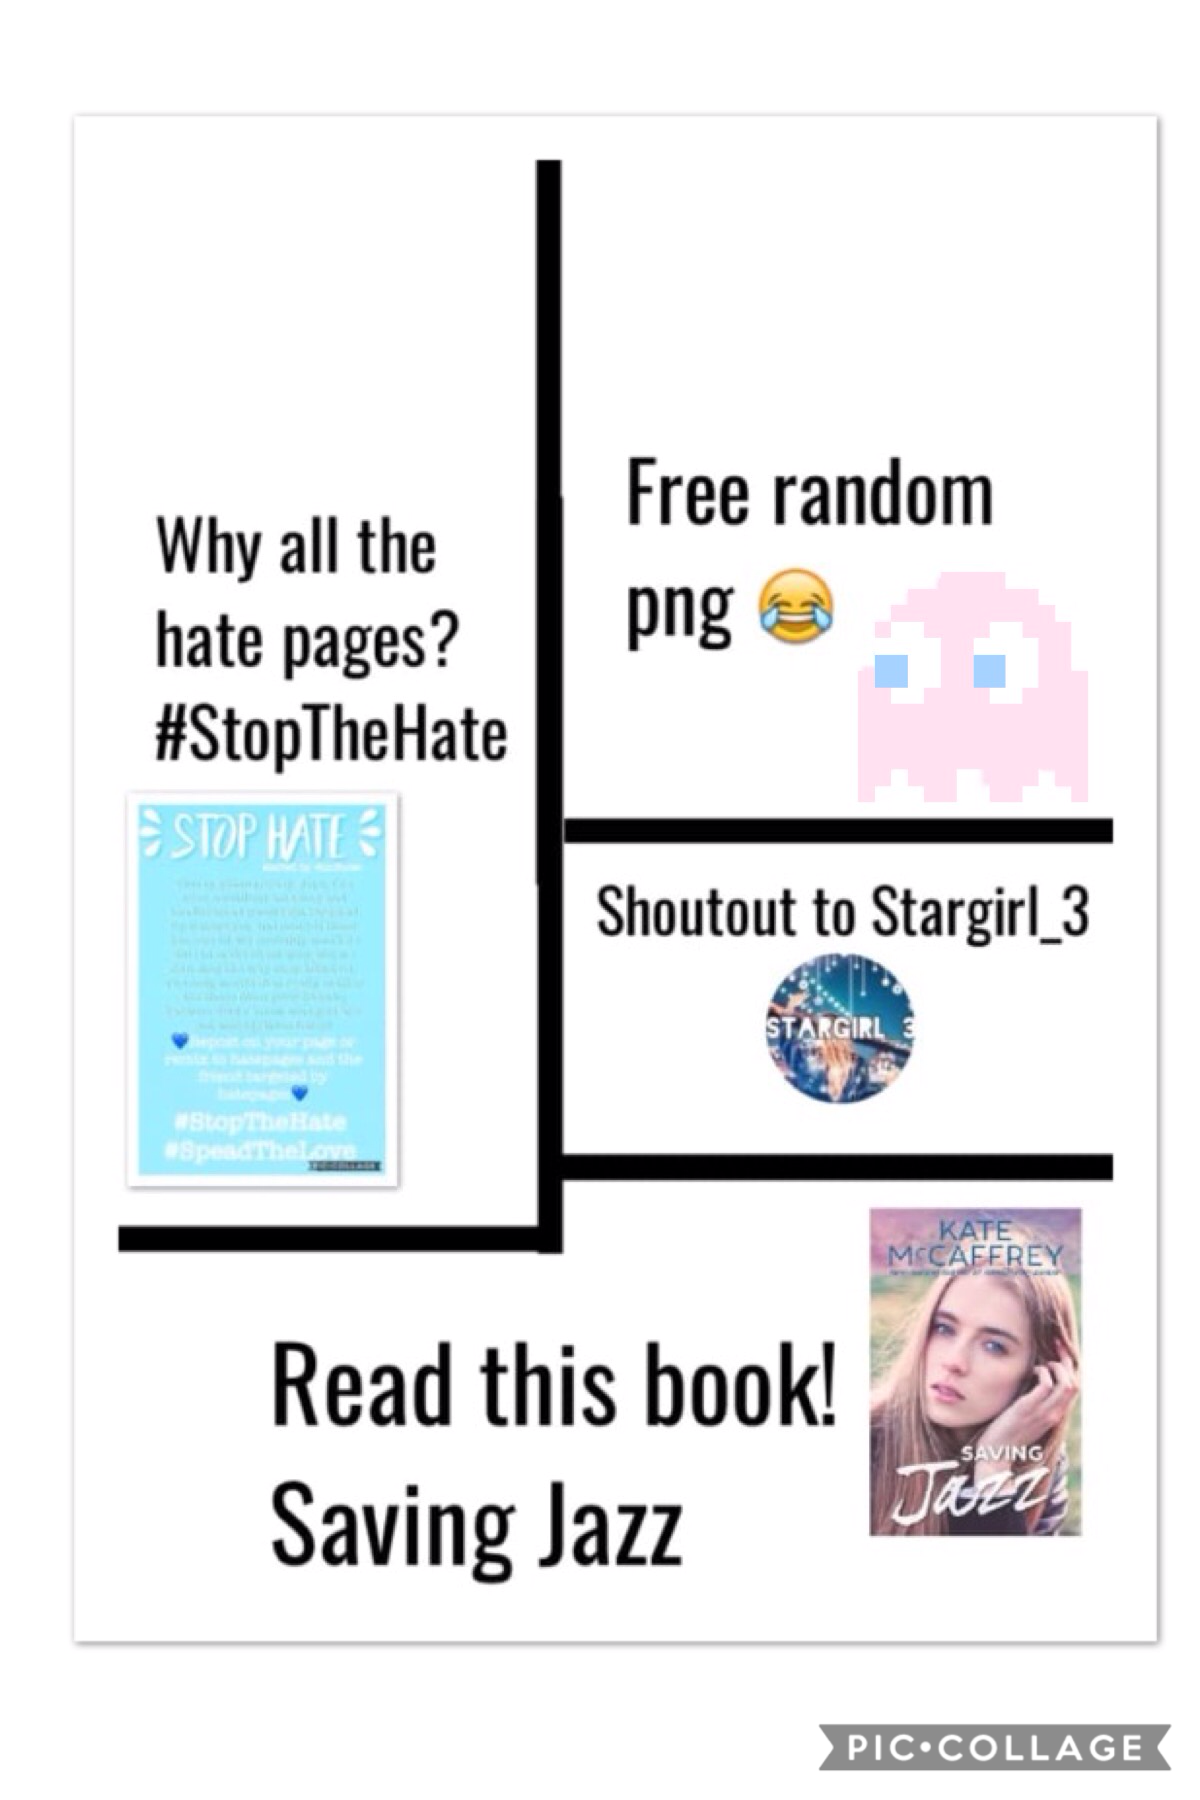 New theme I guess... TAP
go follow @Stargirl_3
AND READ SAVING JAZZ!!!
#Stopthehate